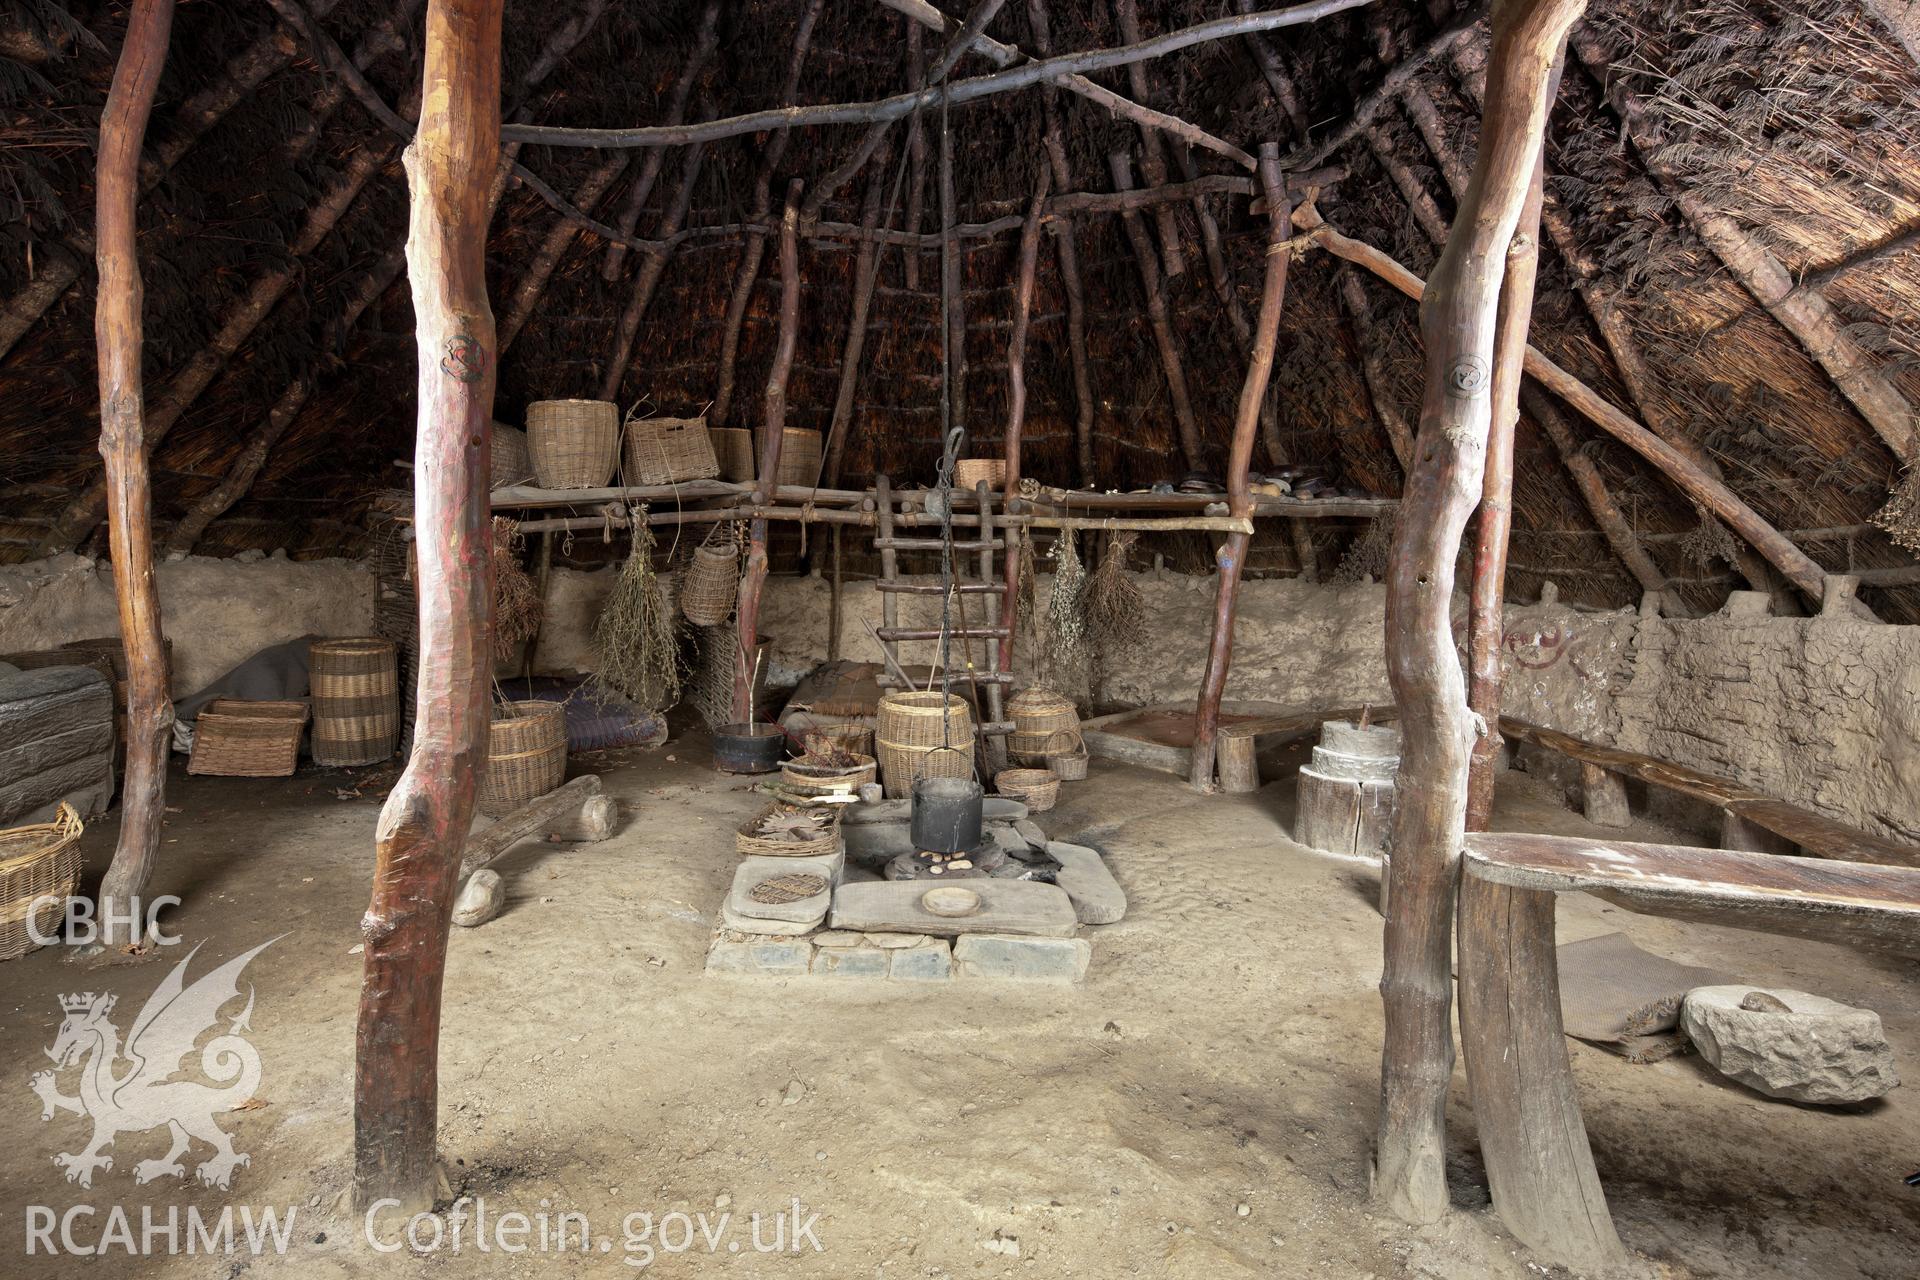 Interior of the cookhouse. Castell Henllys, Iain Wright 17/01/2012